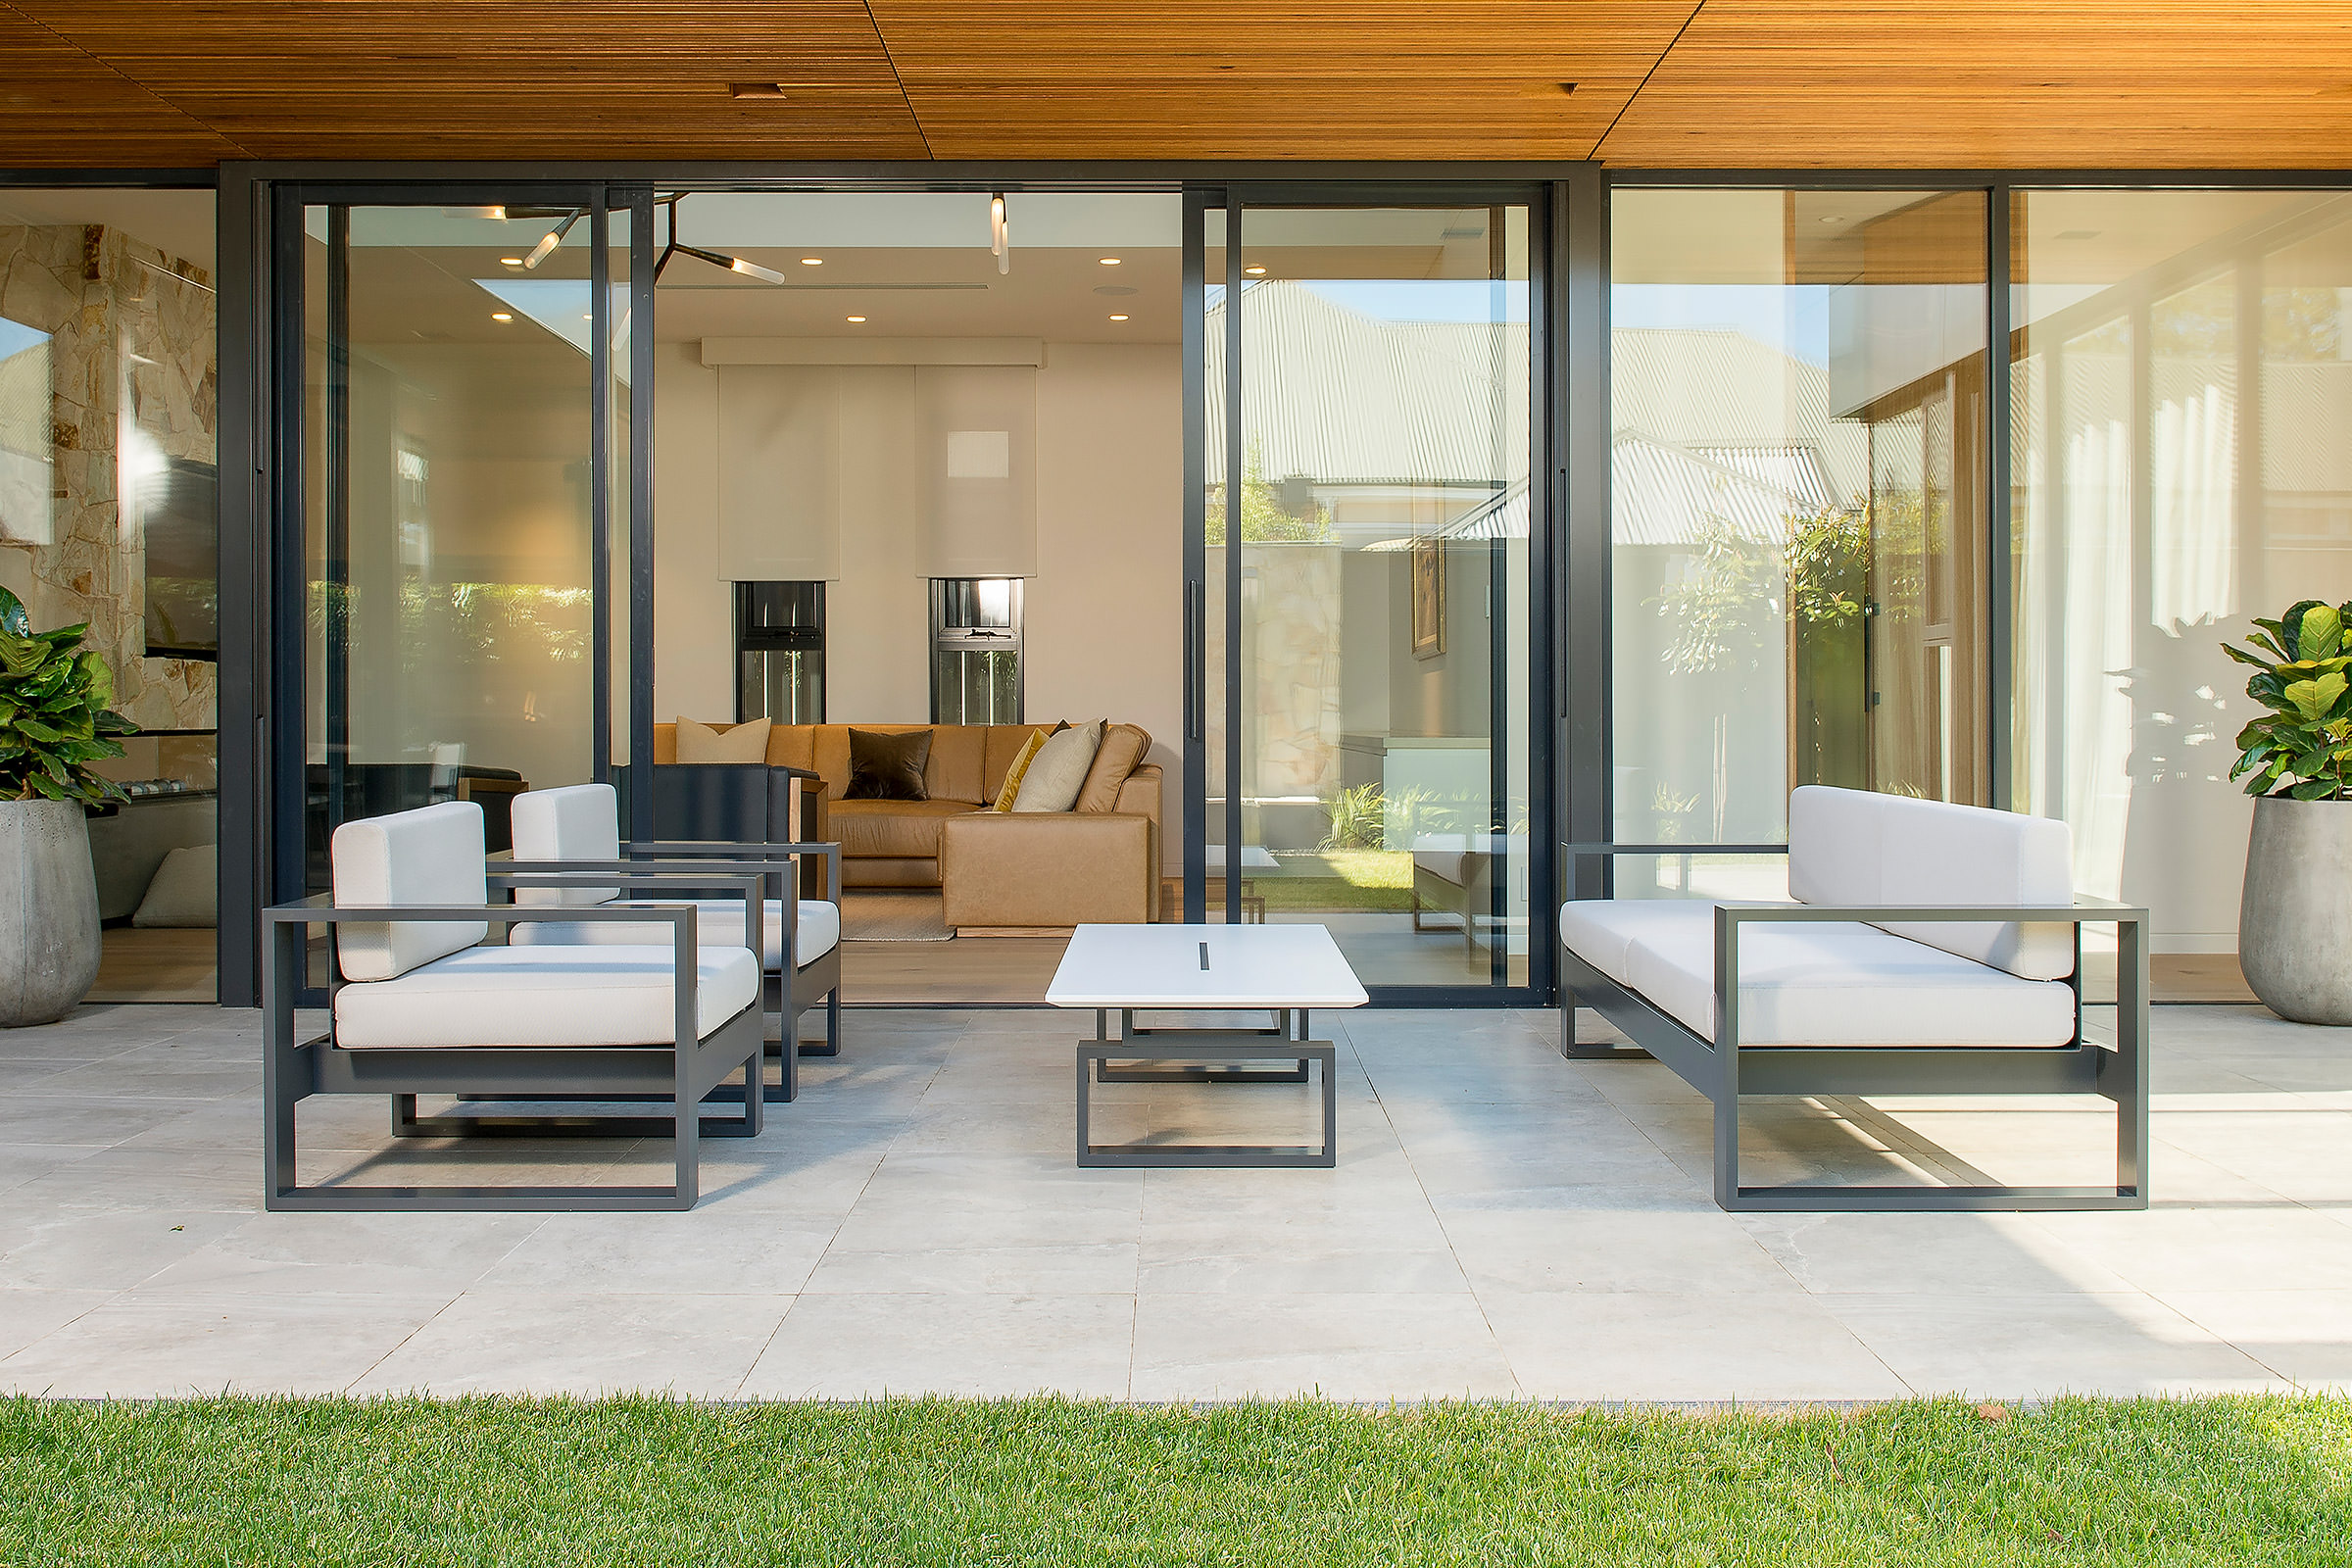 the unique Australian outdoors means you can enjoy relaxing in your patio for most of the year with a Franco Crea designer furniture outdoor setting to provide peace of mind to tolerate outdoor environments.